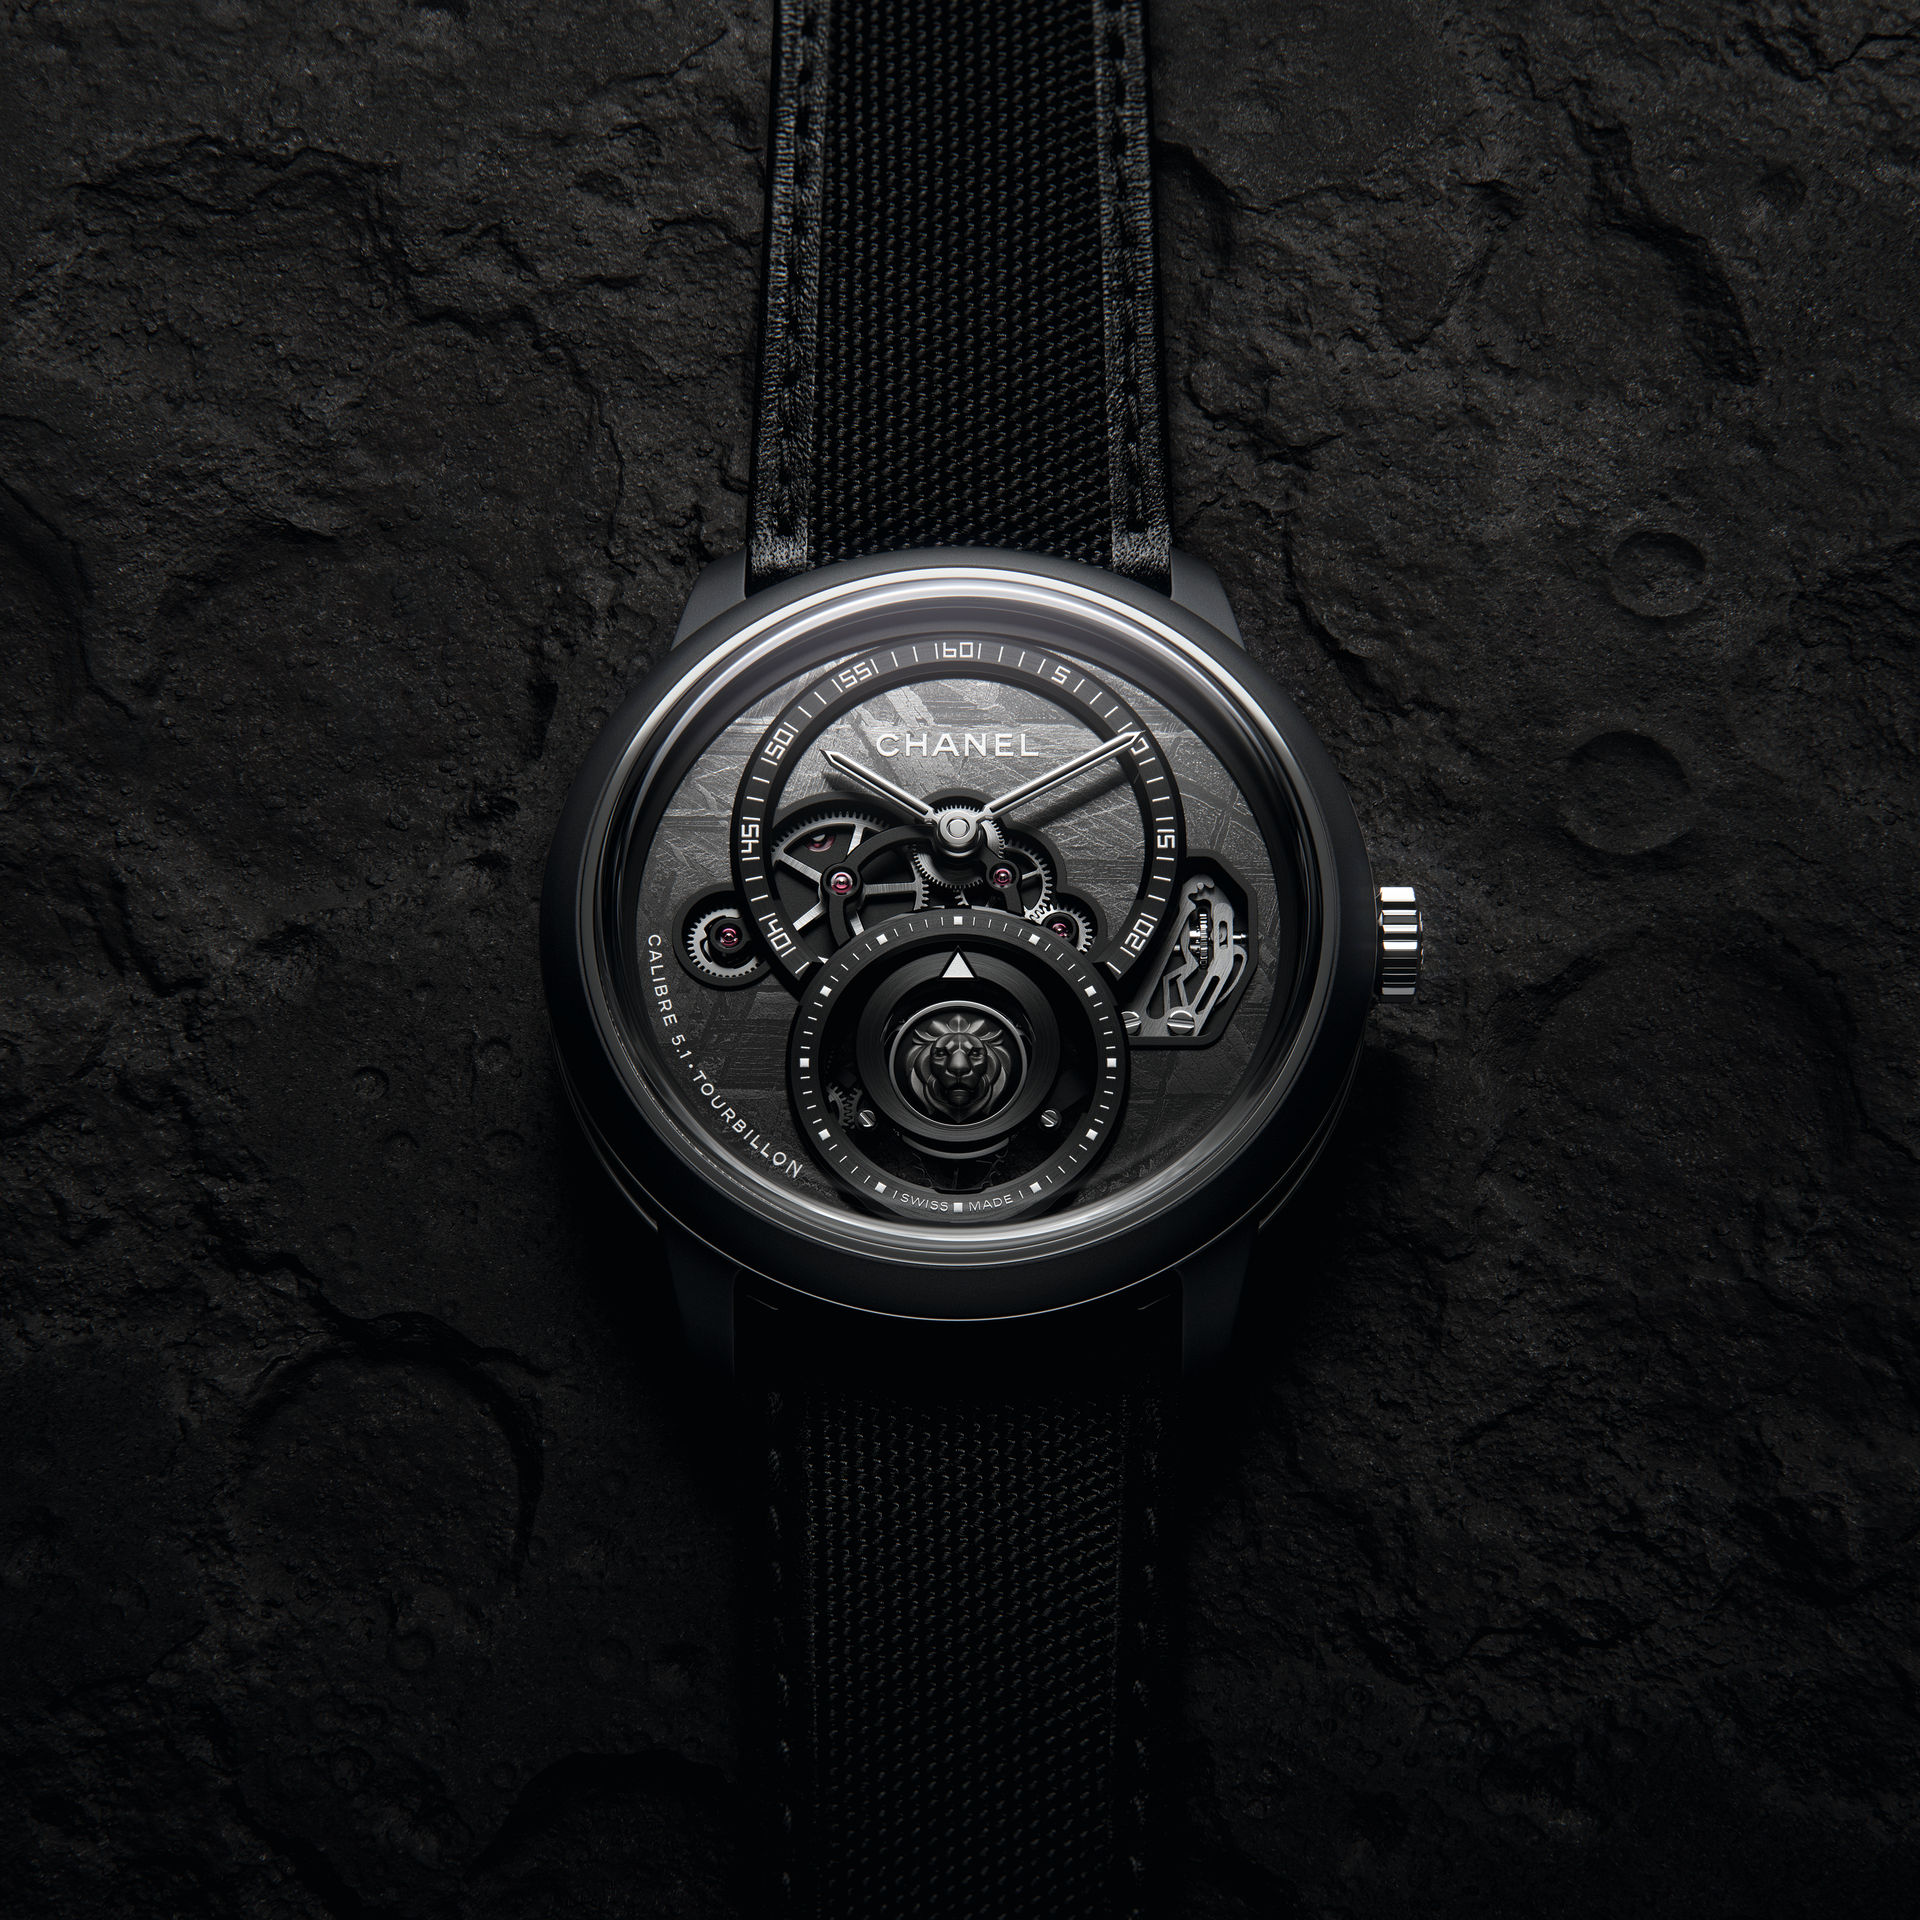 With their latest, Chanel demonstrates undeniable watchmaking legitimacy